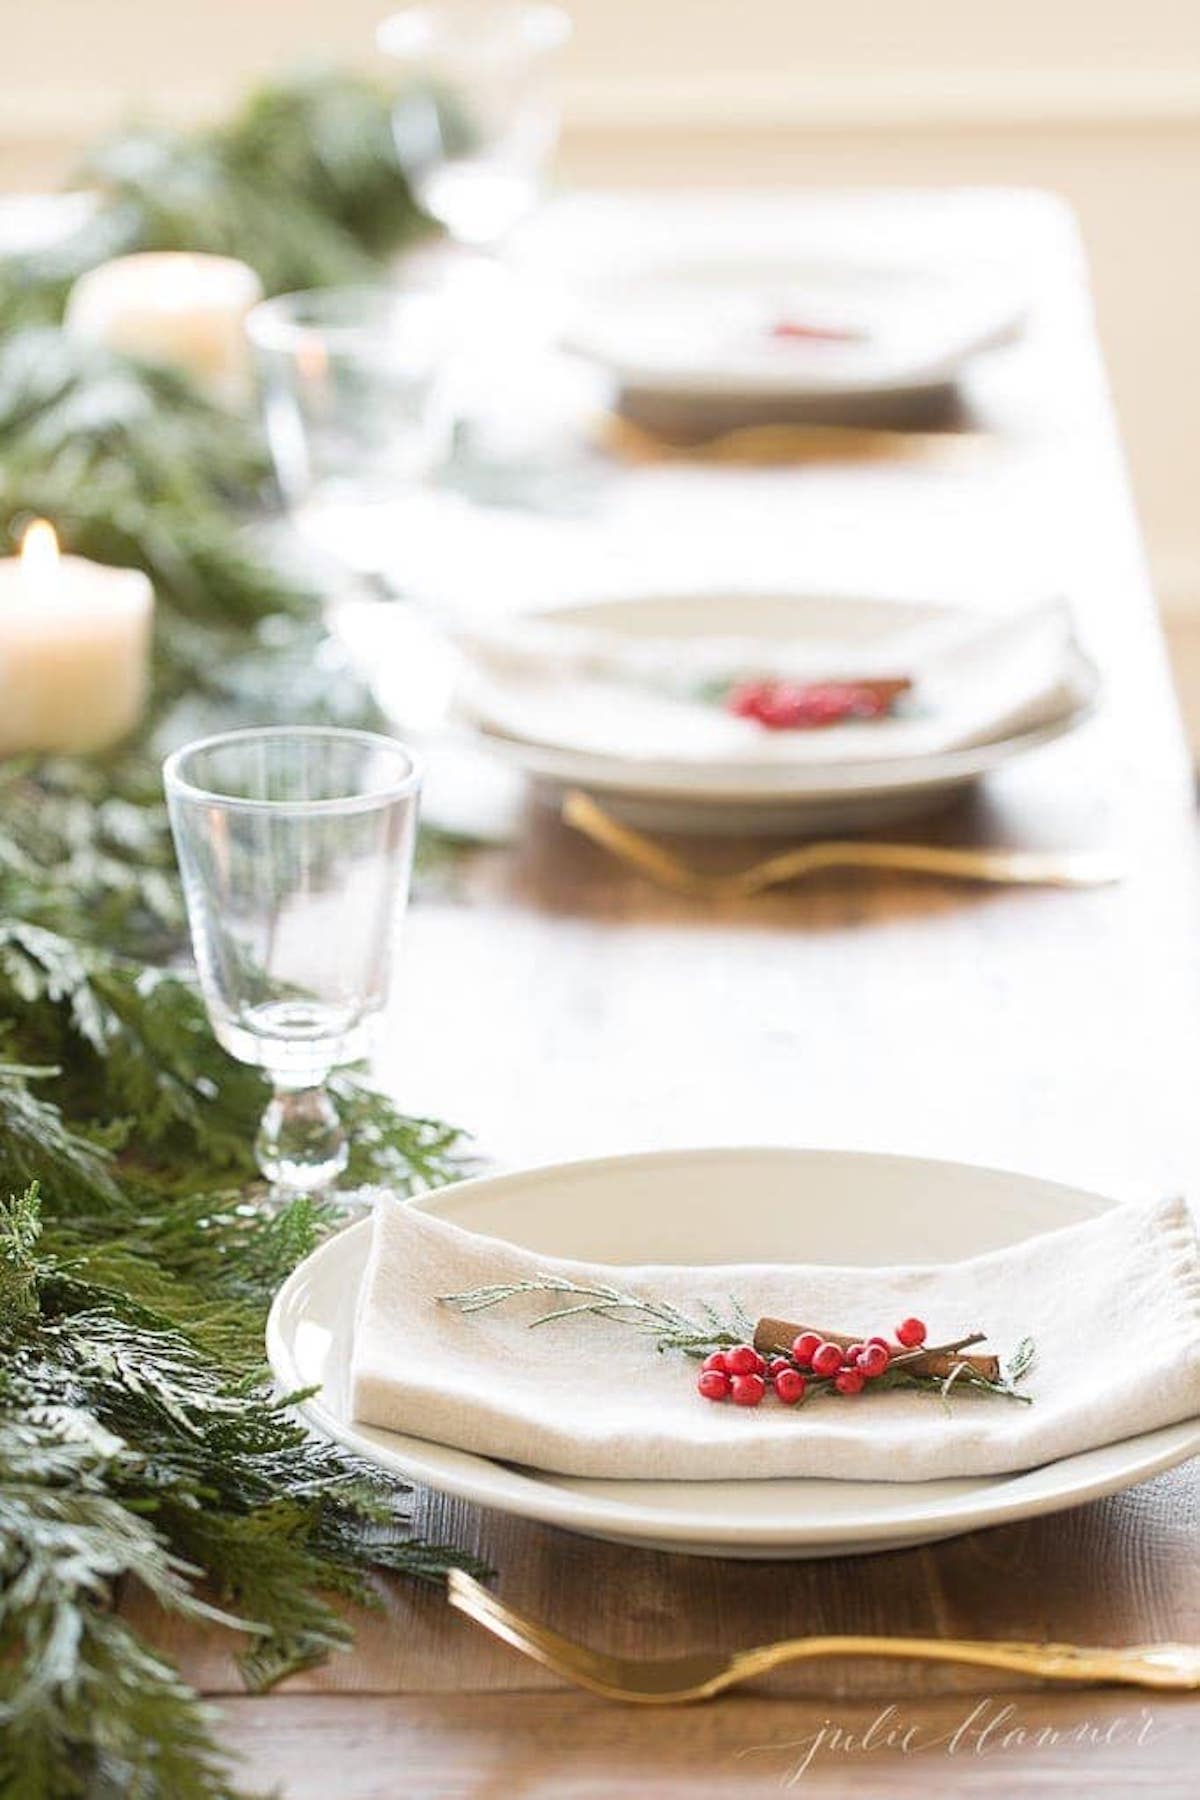 A festive table setting adorned with a garland of holly and pine cones.